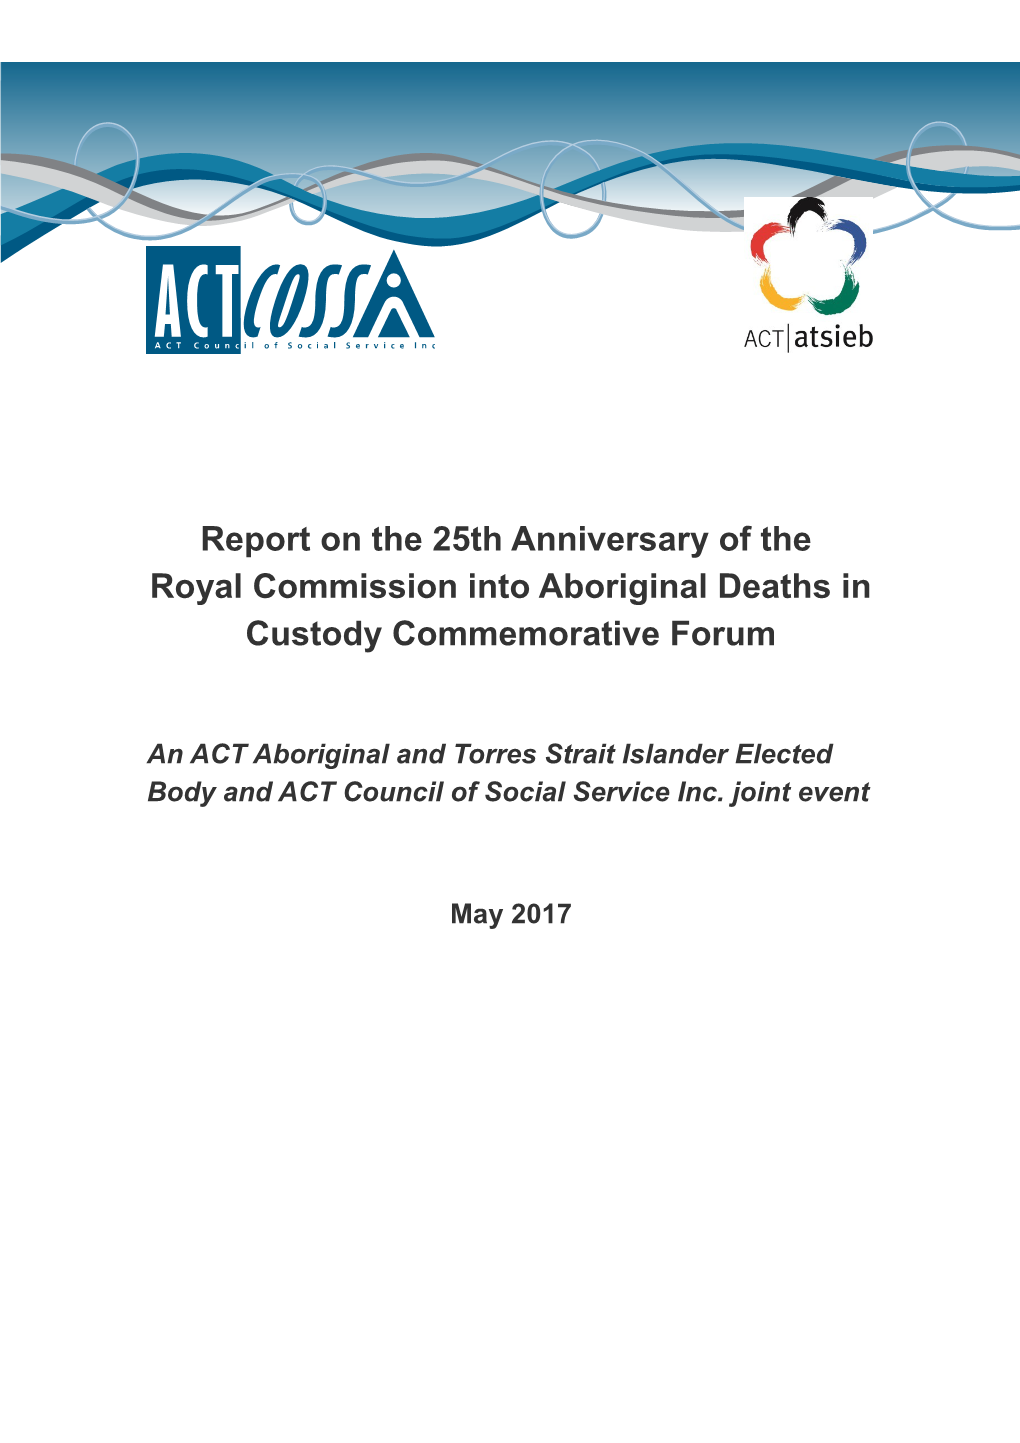 Report on the 25Th Anniversary of the Royal Commission Into Aboriginal Deaths in Custody